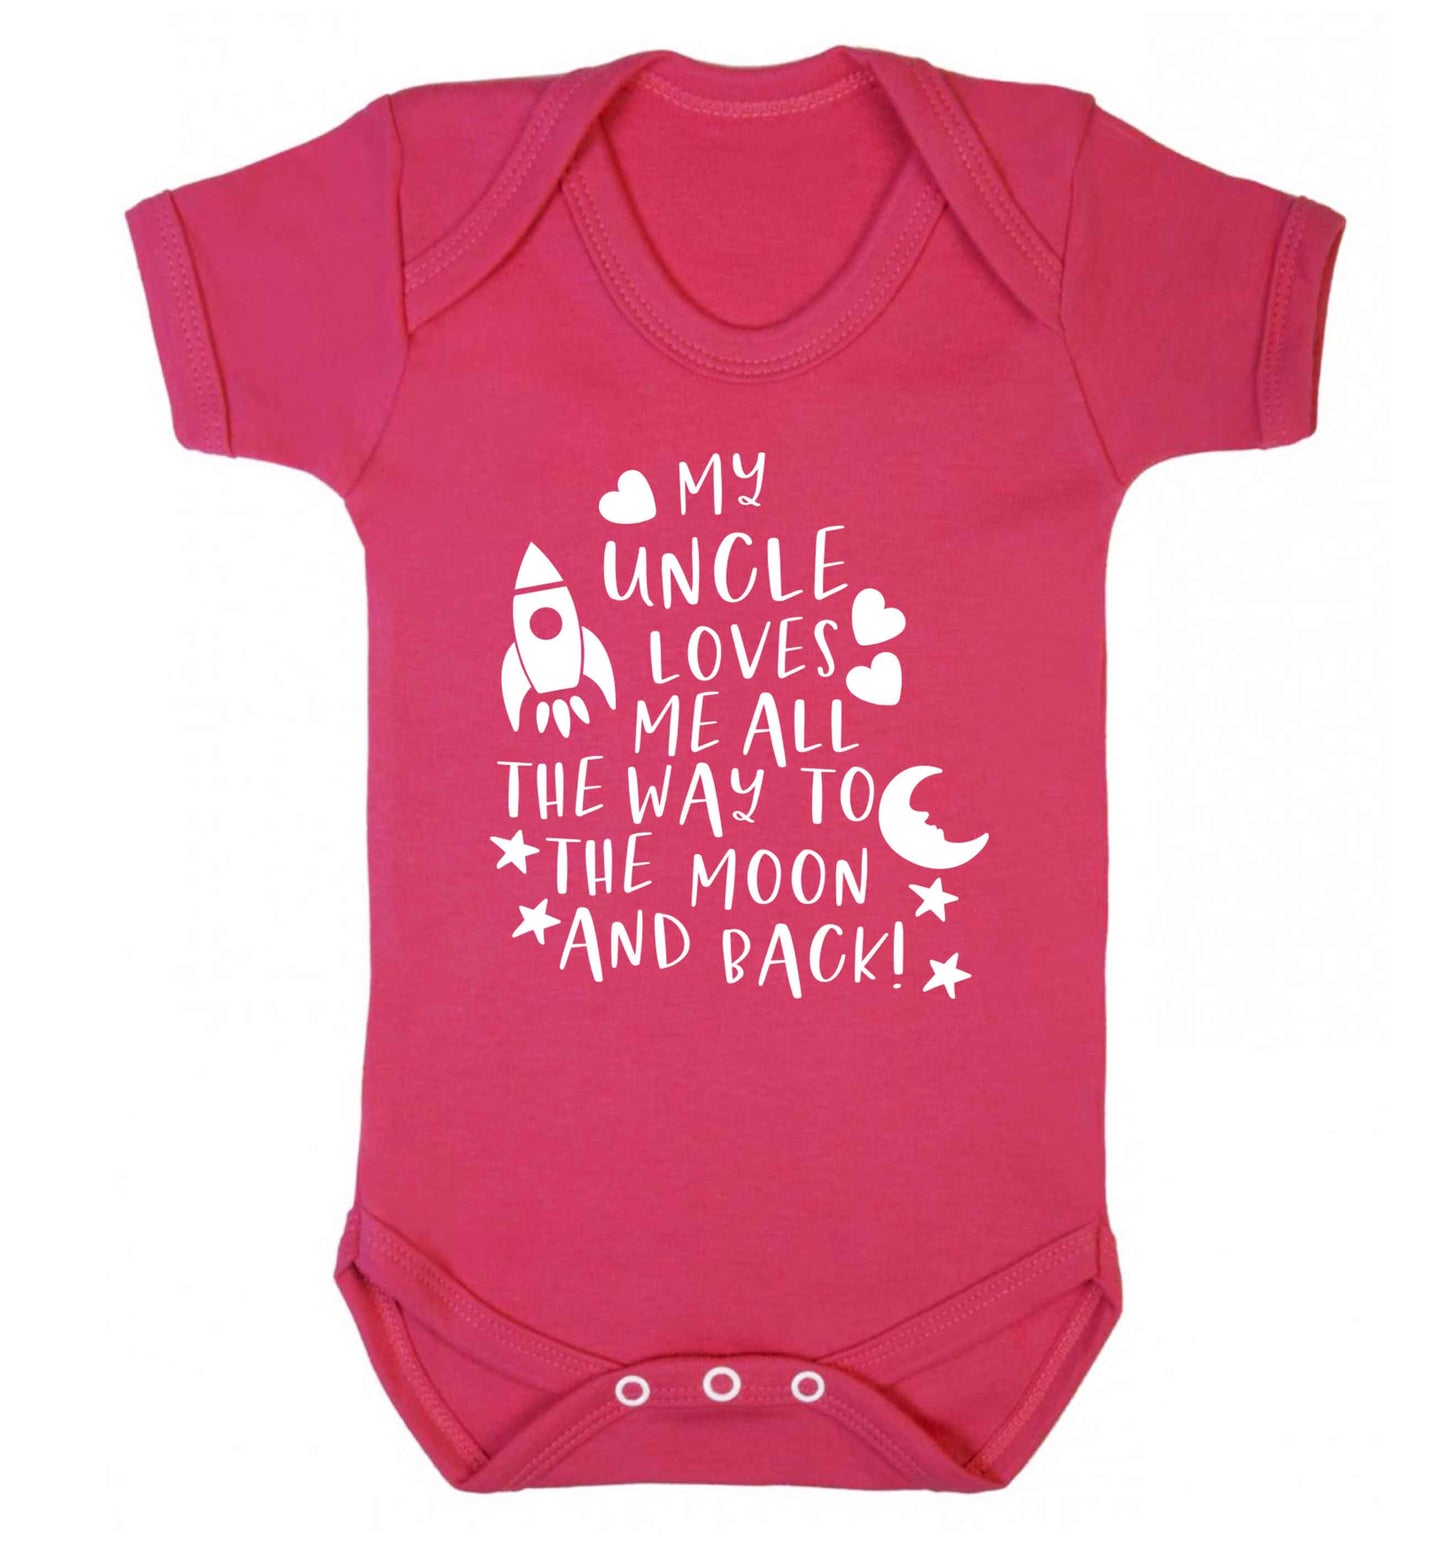 My uncle loves me all the way to the moon and back Baby Vest dark pink 18-24 months